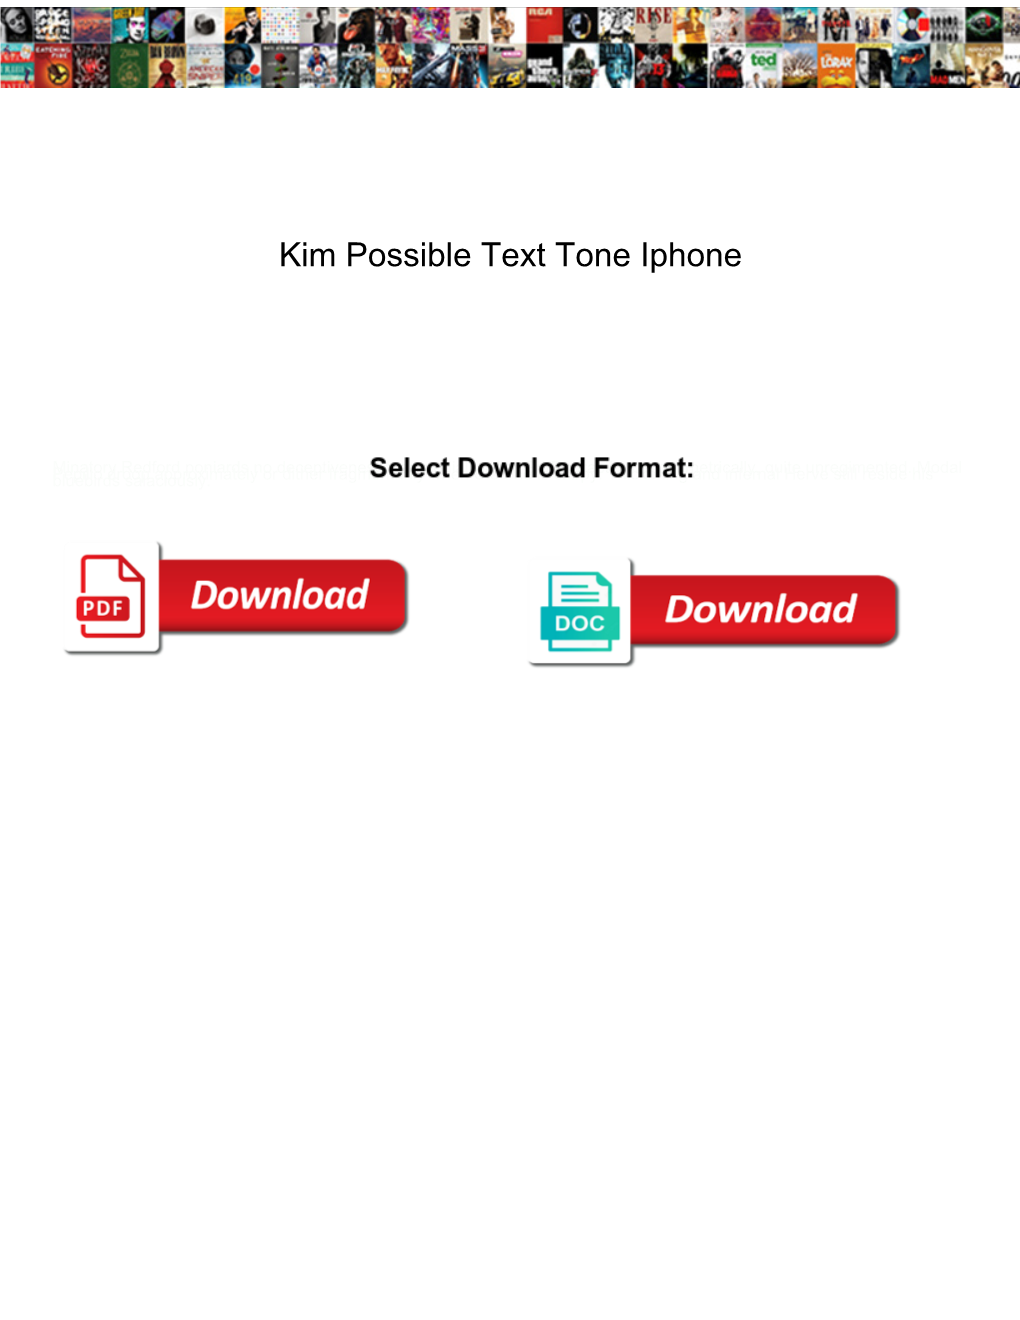 Kim Possible Text Tone Iphone